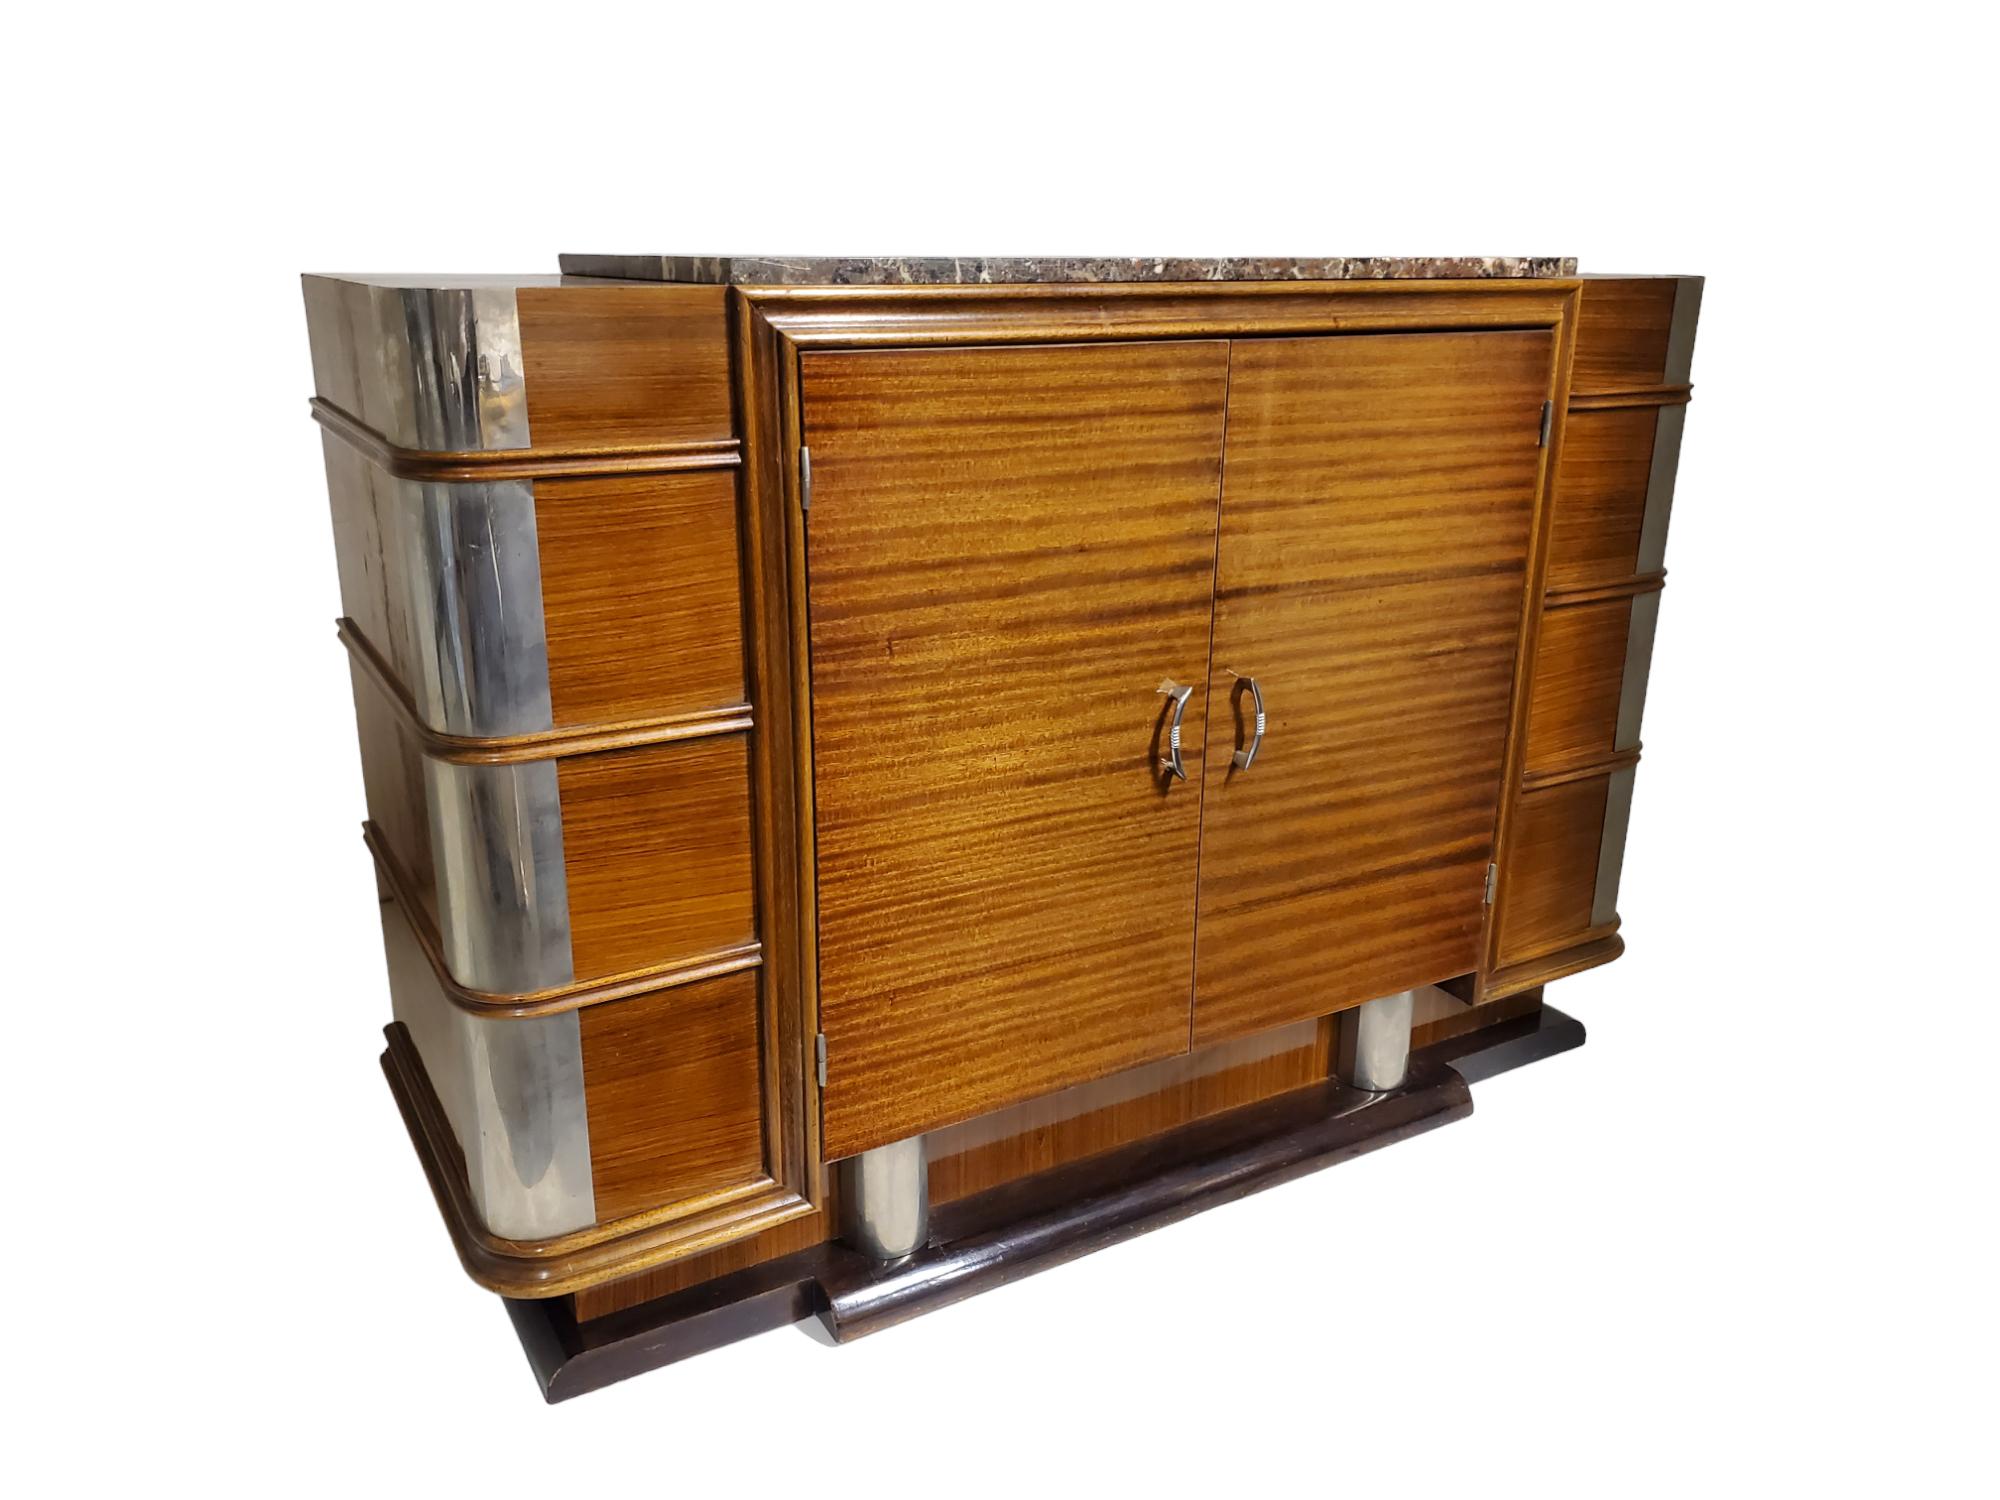 This French Modernist buffet features a captivating ribbon stripe mahogany design. Adding a touch of uniqueness, the polished nickeled bronze mounts highlight the rounded corners of the cabinet, resembling a protective armor. 
The horizontal grain